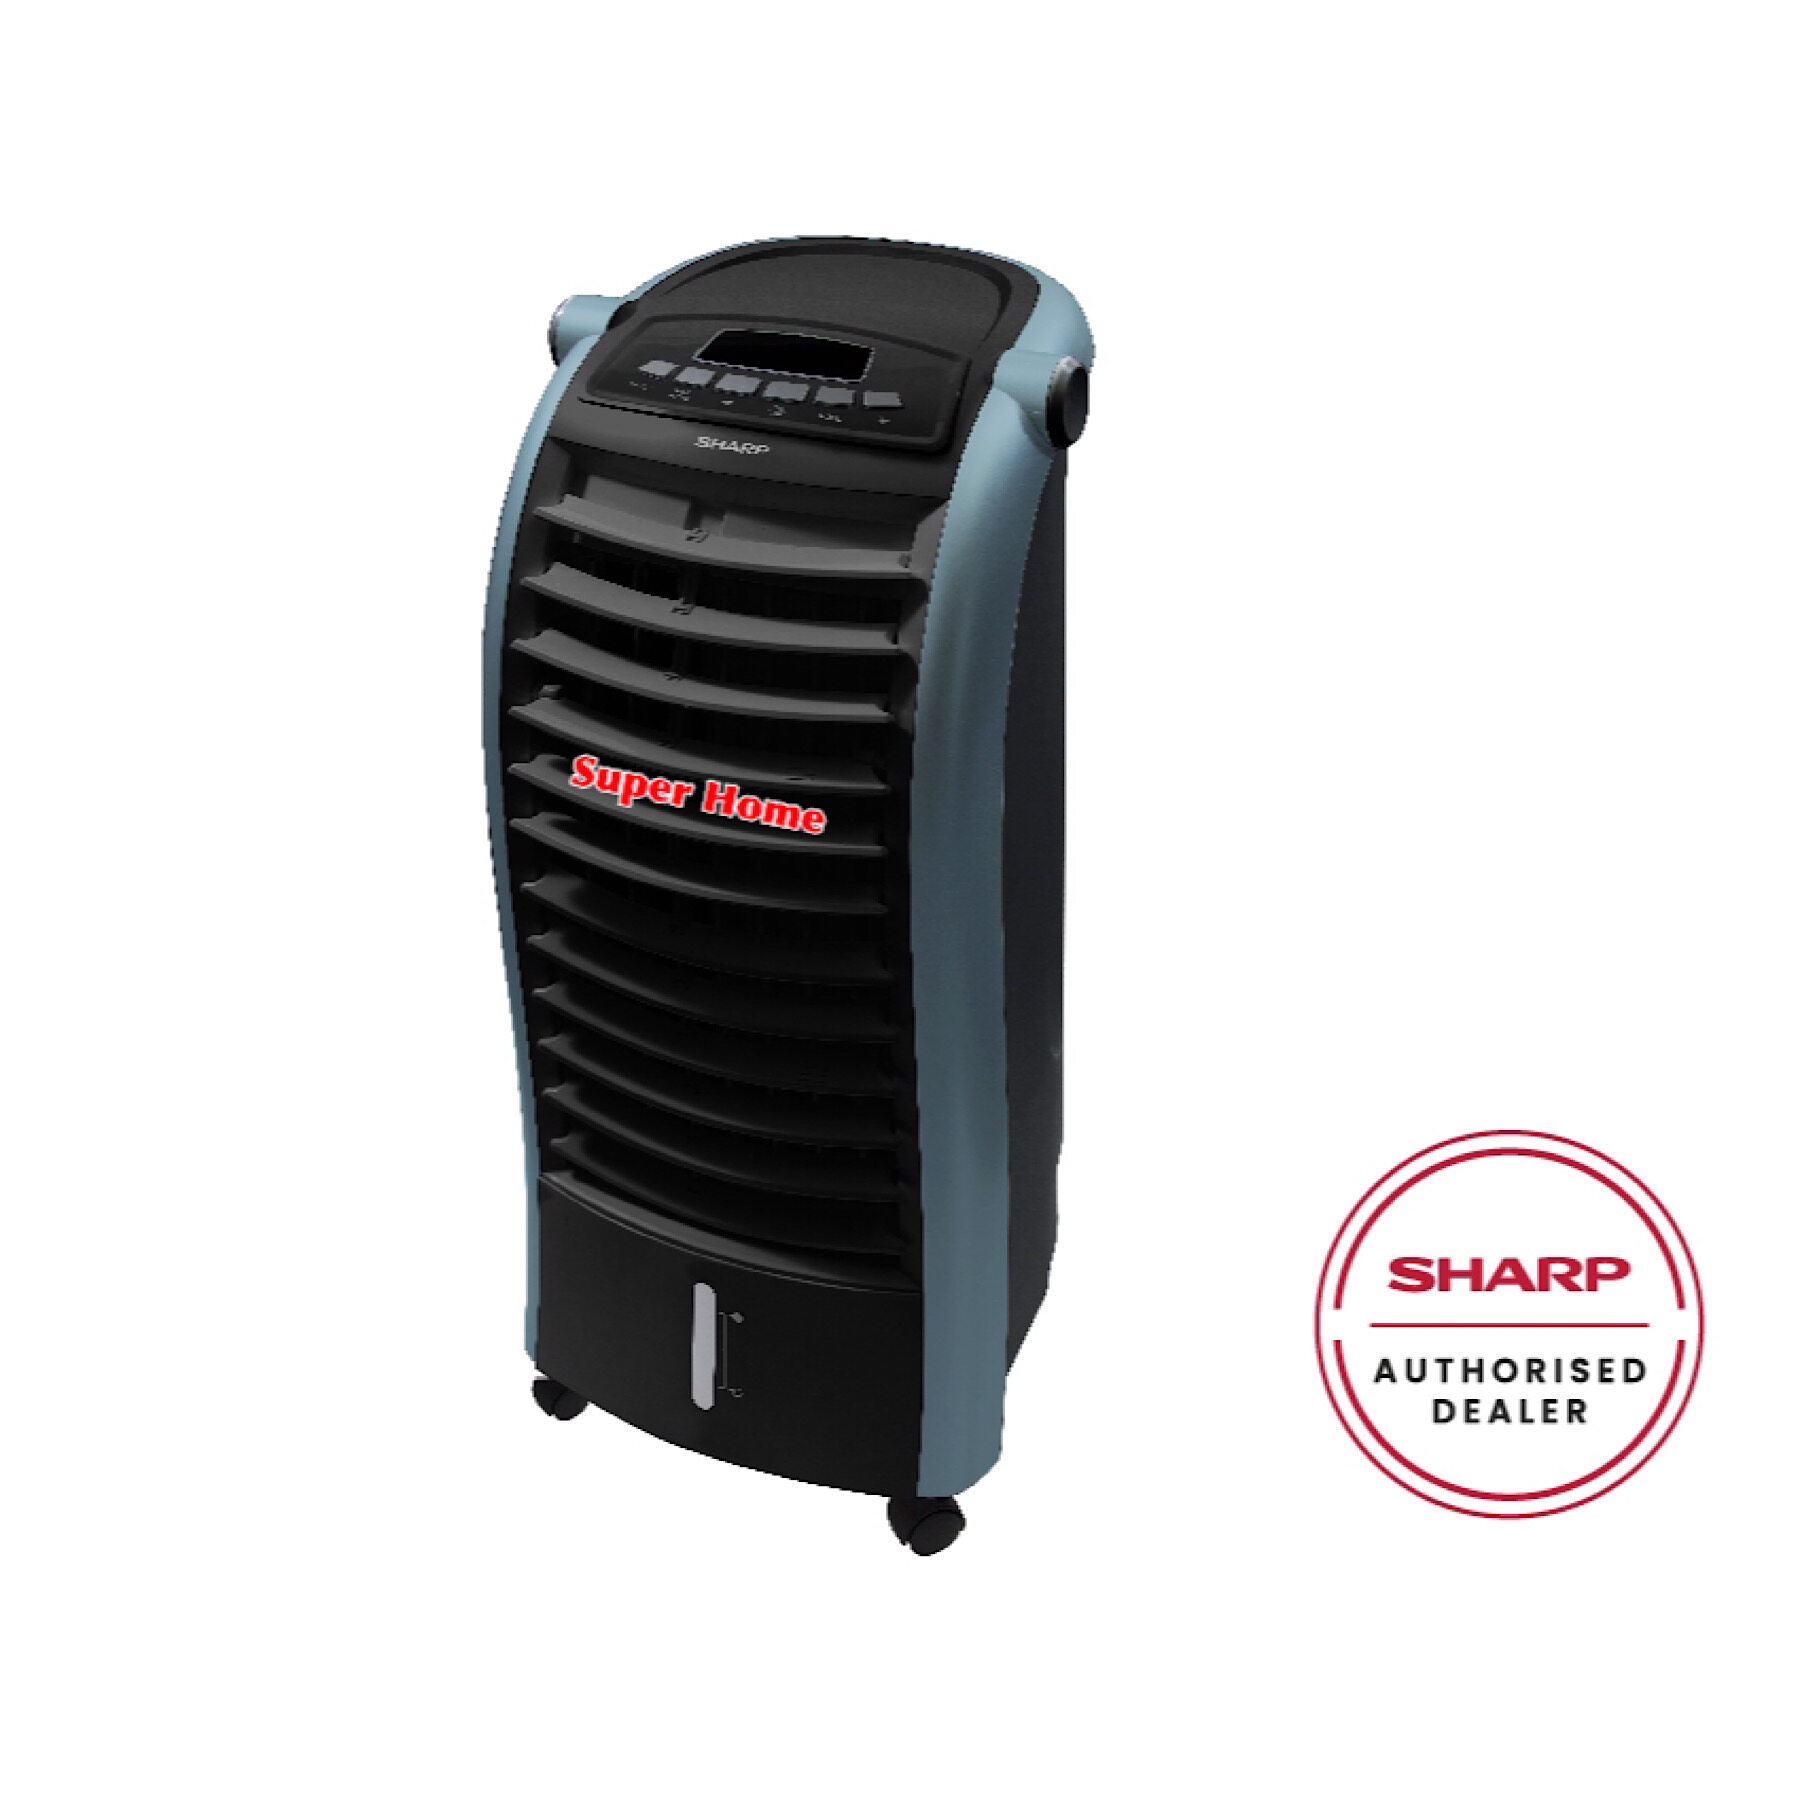 Sharp Air Cooler PJA36TVB - 6L(black) with Remote Control